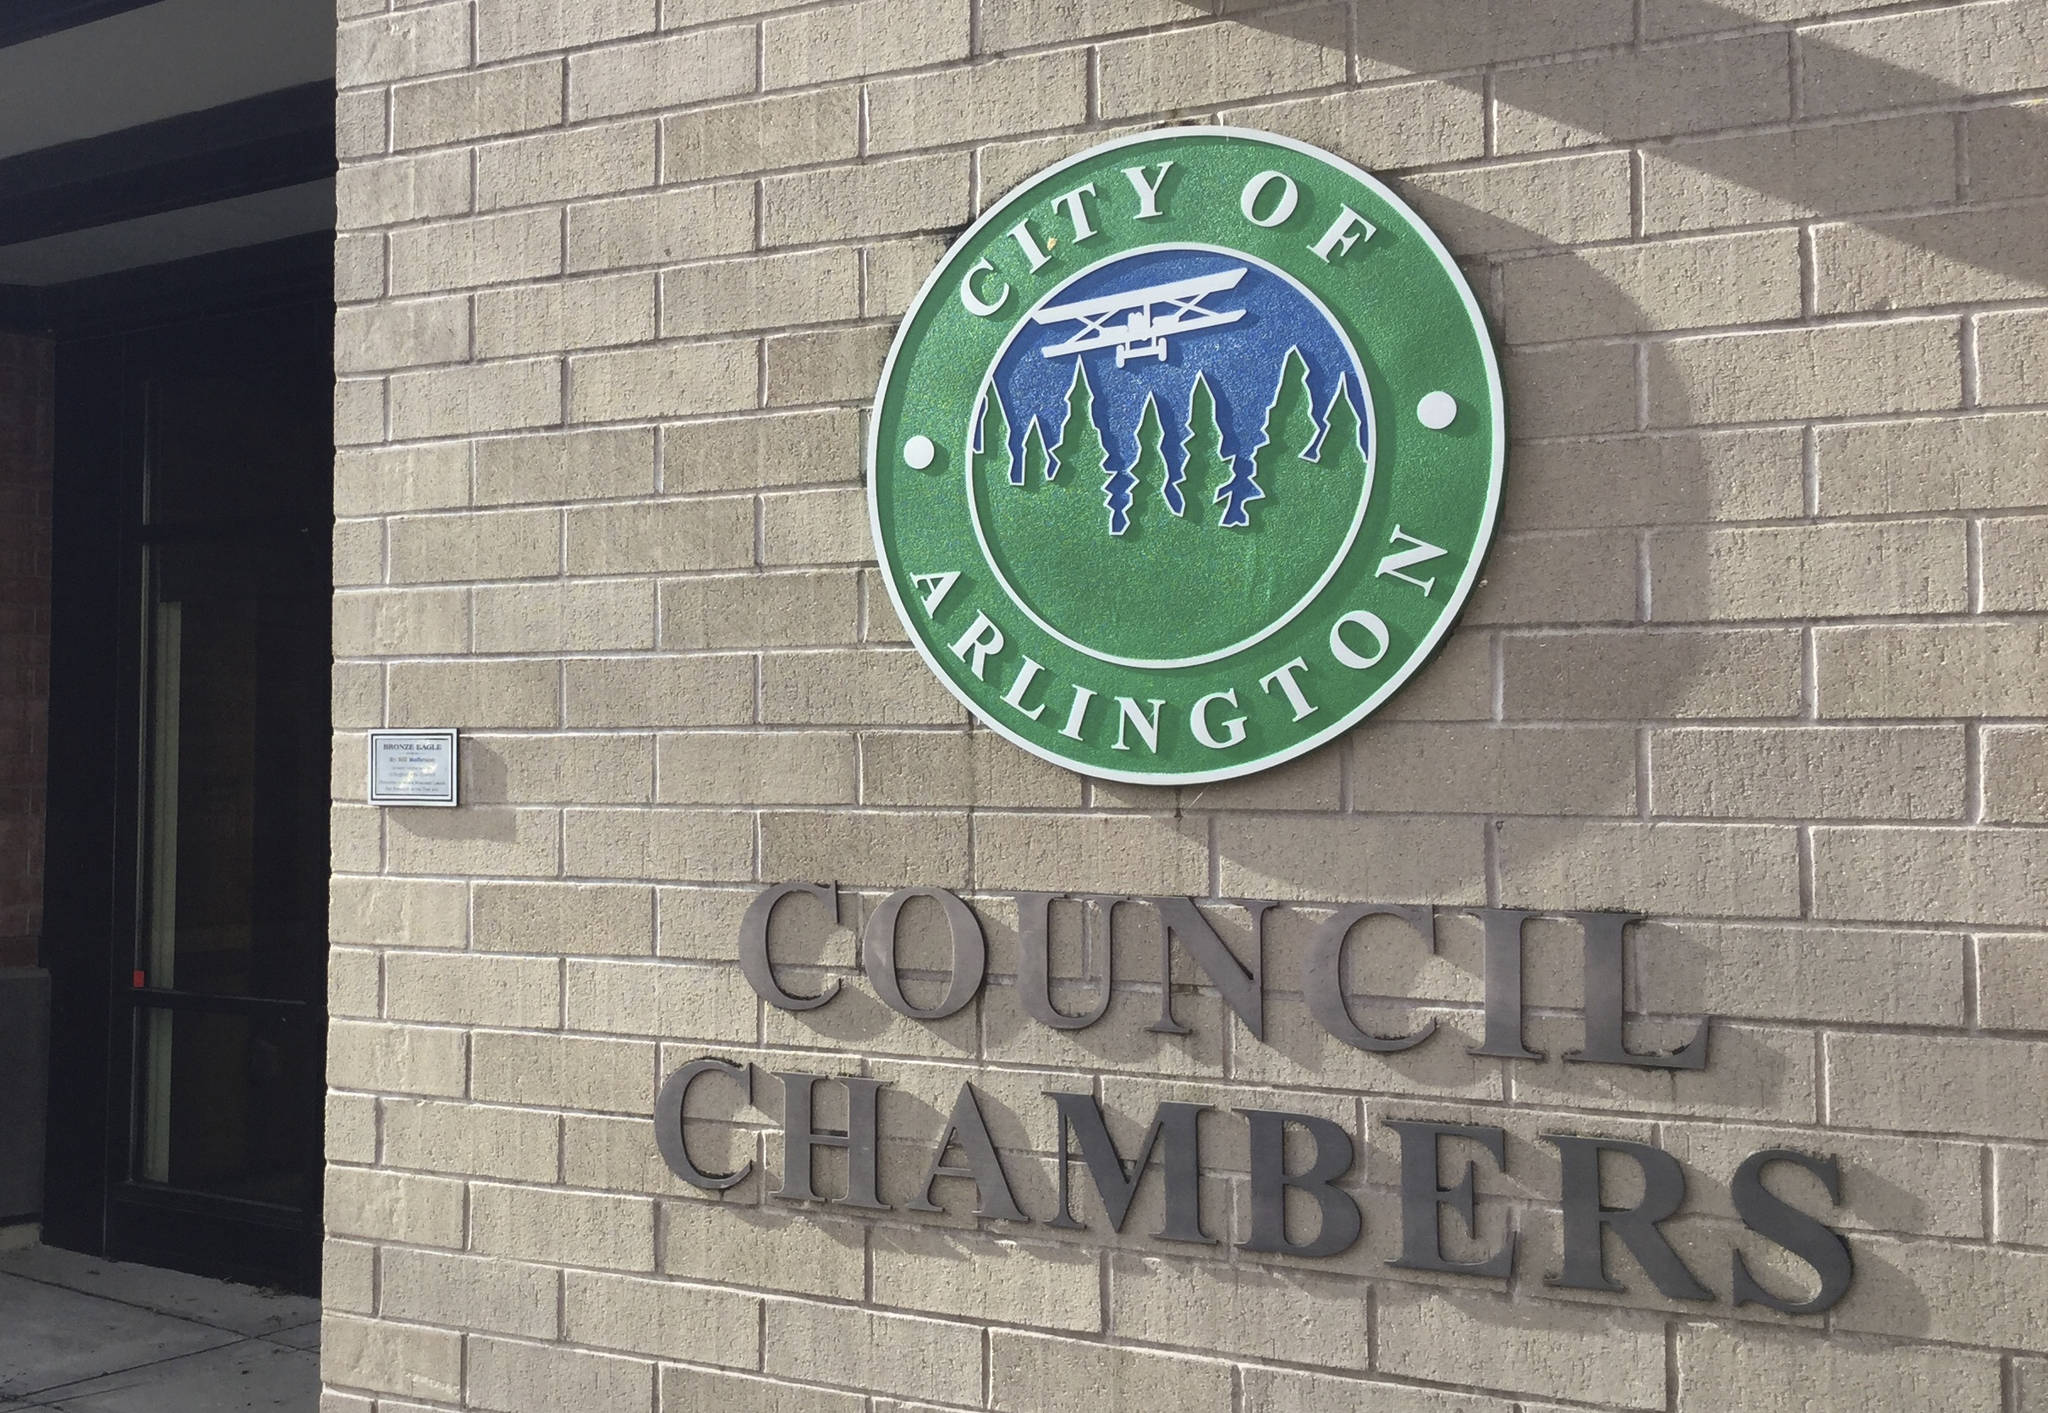 City of Arlington carries out operational changes to encourage social distancing